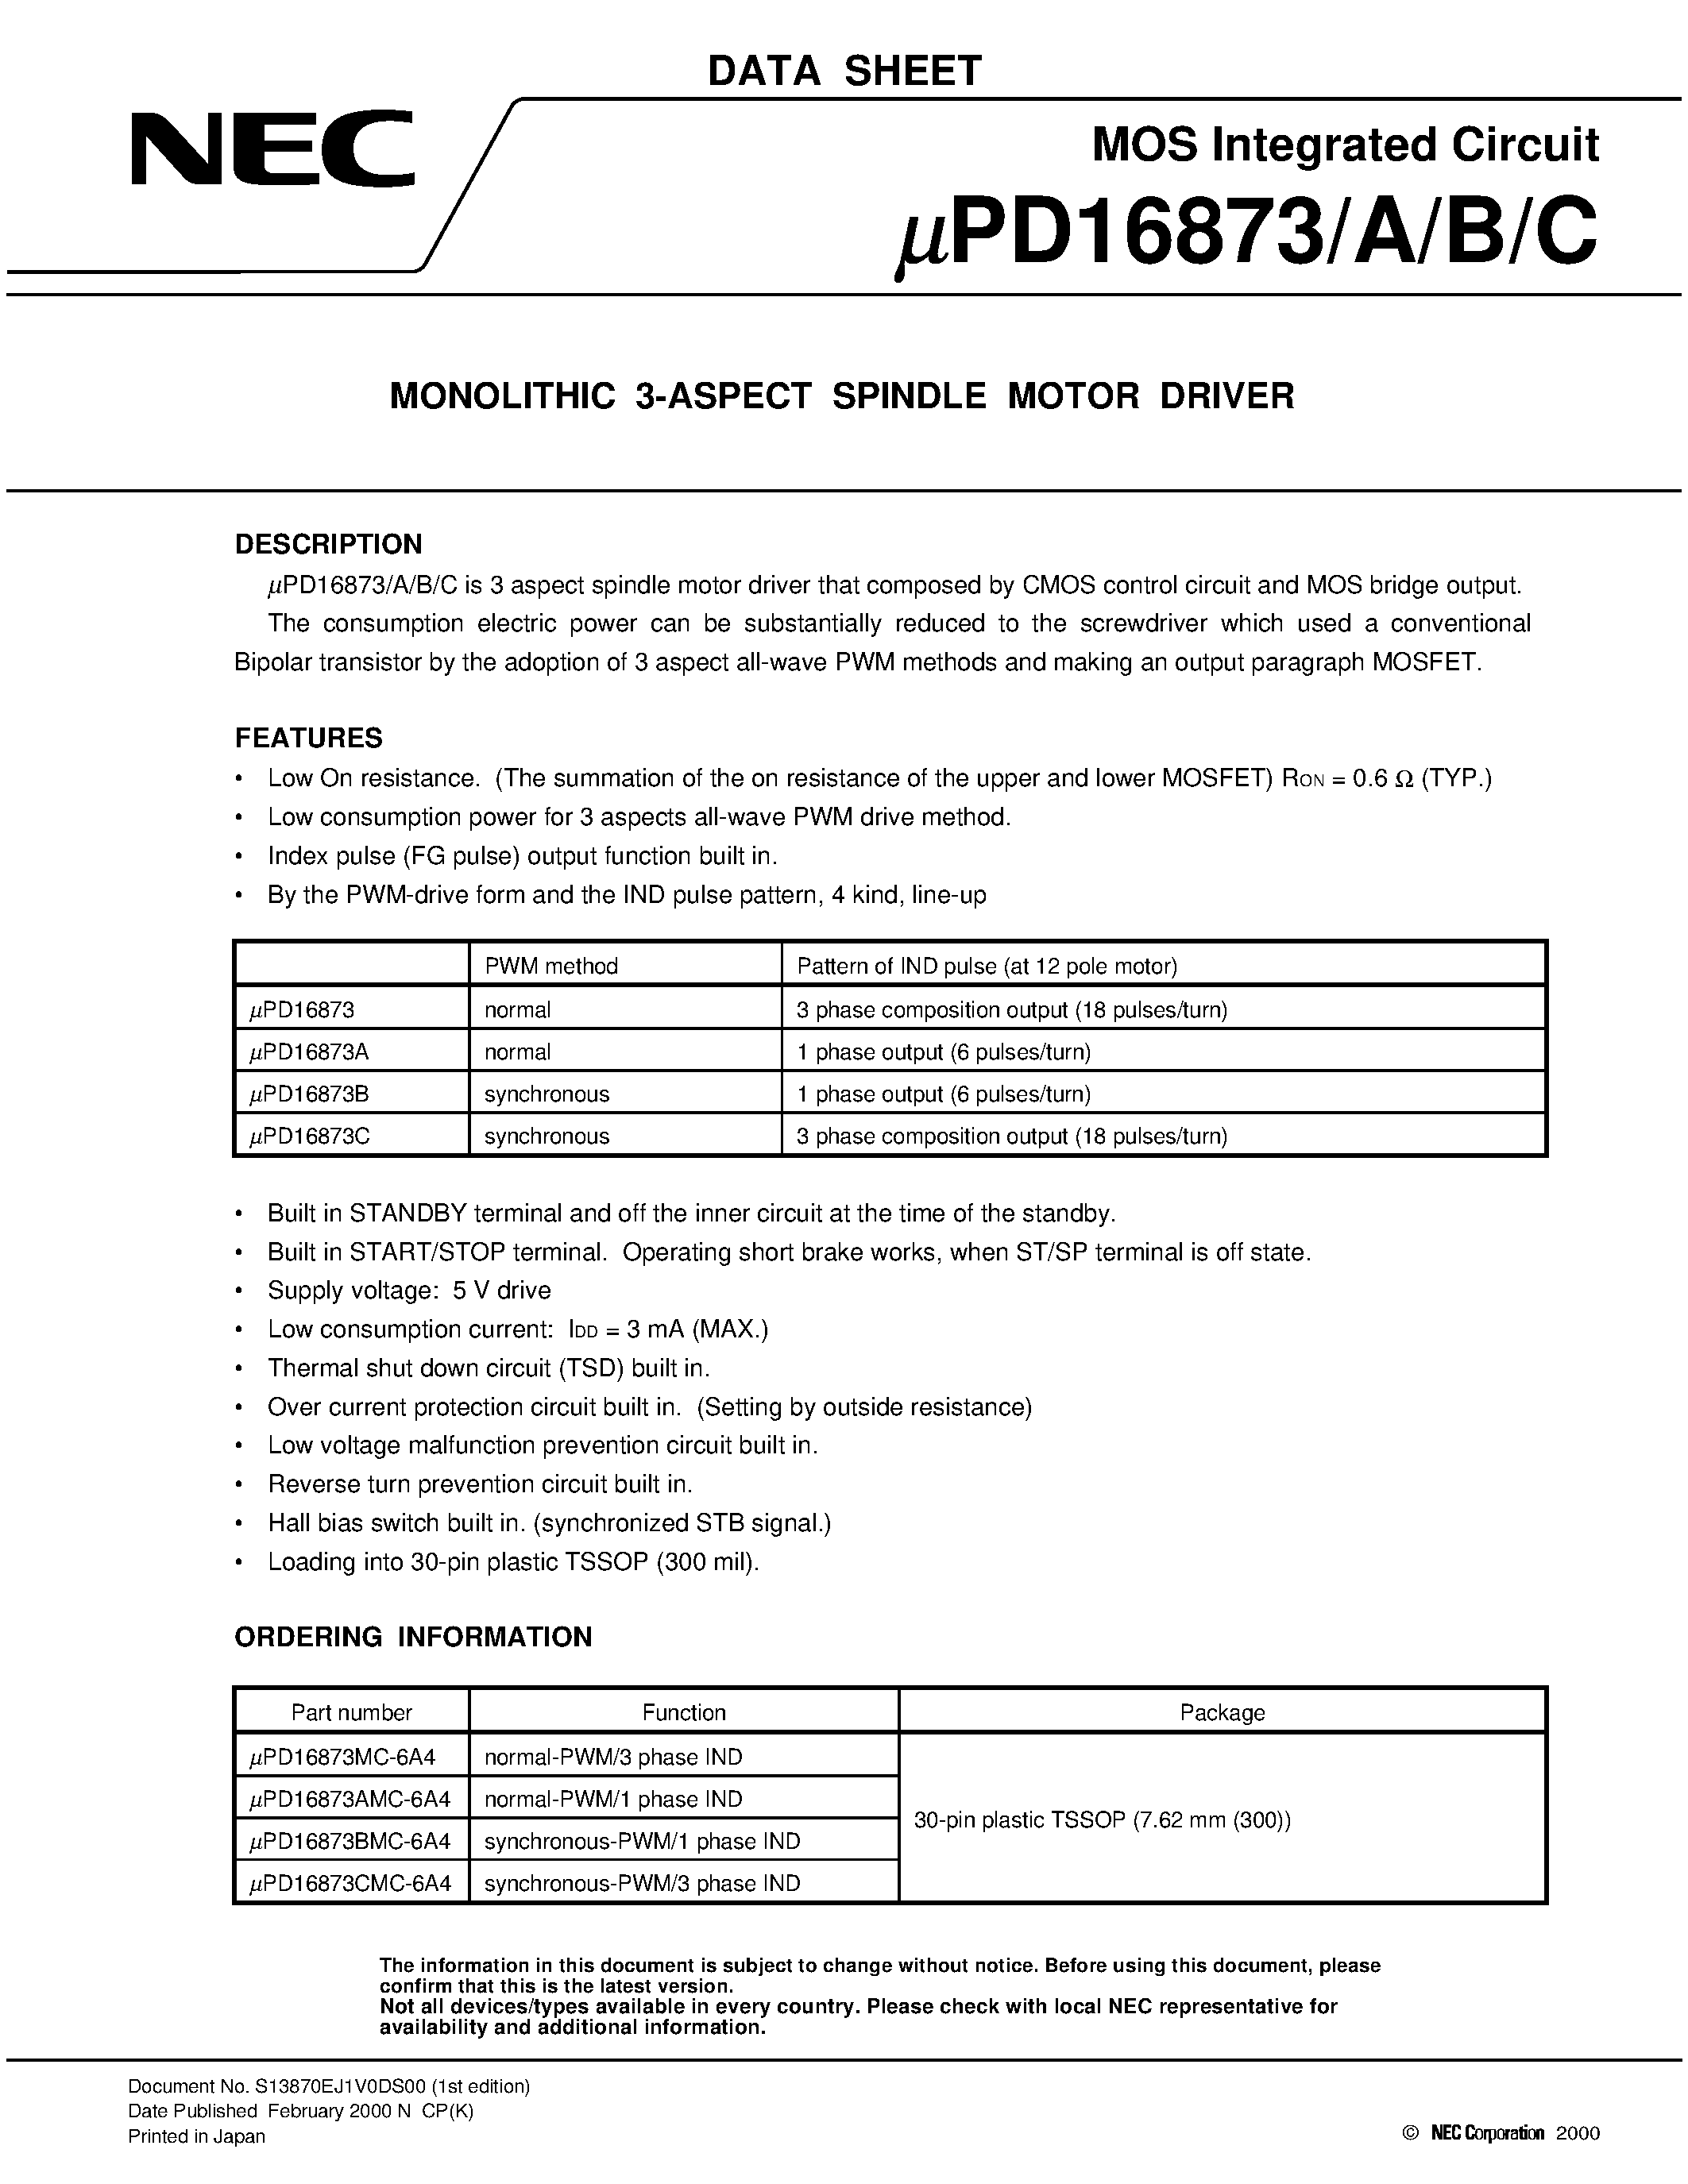 Datasheet UPD16873MC-6A4 - MONOLITHIC 3-ASPECT SPINDLE MOTOR DRIVER page 1